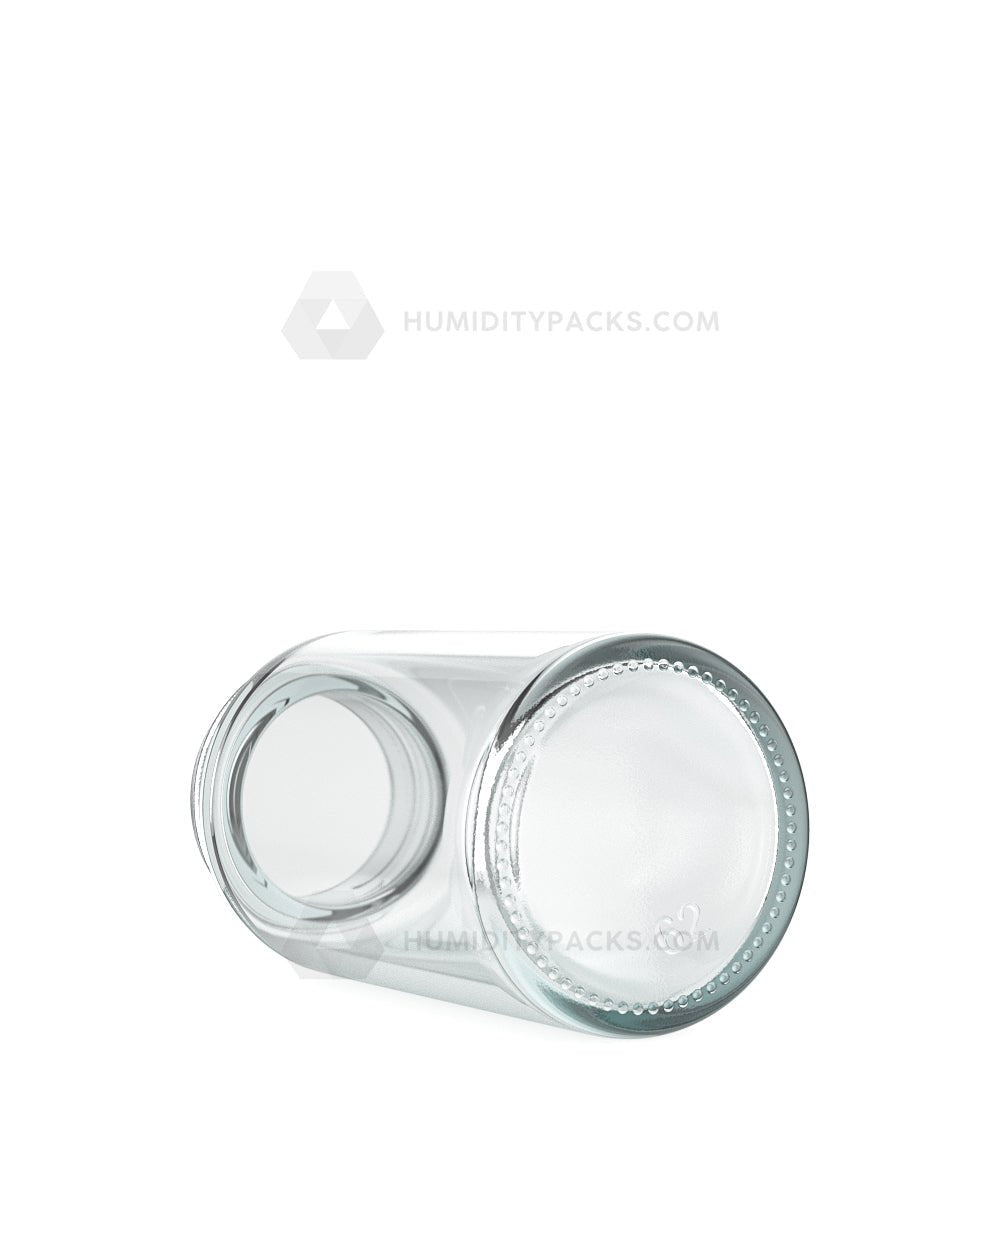 38mm Wide Mouth Straight Clear 2oz Glass Jar 180/Box Humidity Packs - 4